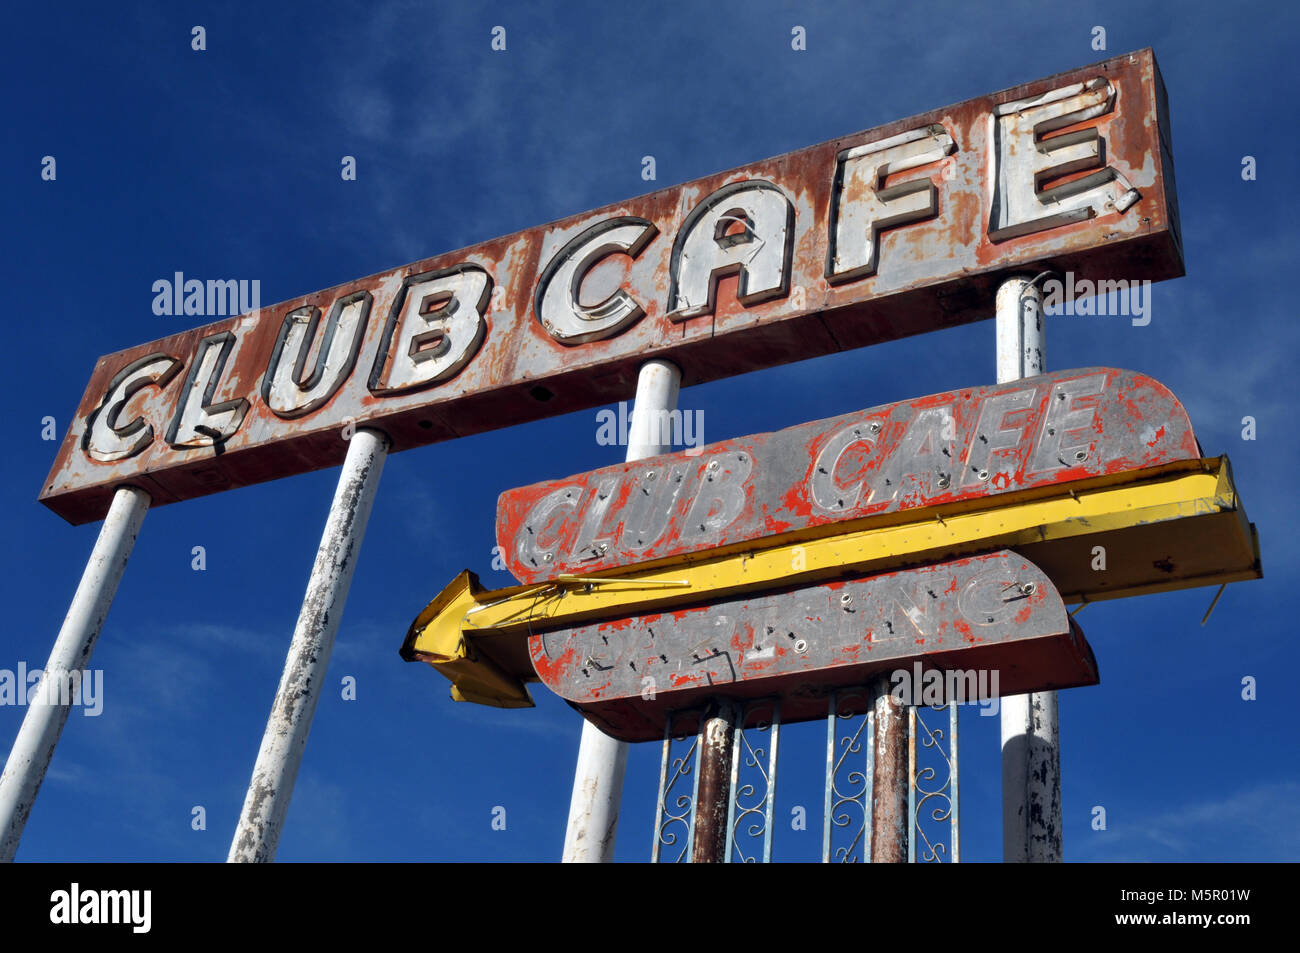 Faded sign for the former Club Cafe restaurant in the Route 66 town of Santa Rosa, New Mexico stands against a bright blue sky. Stock Photo